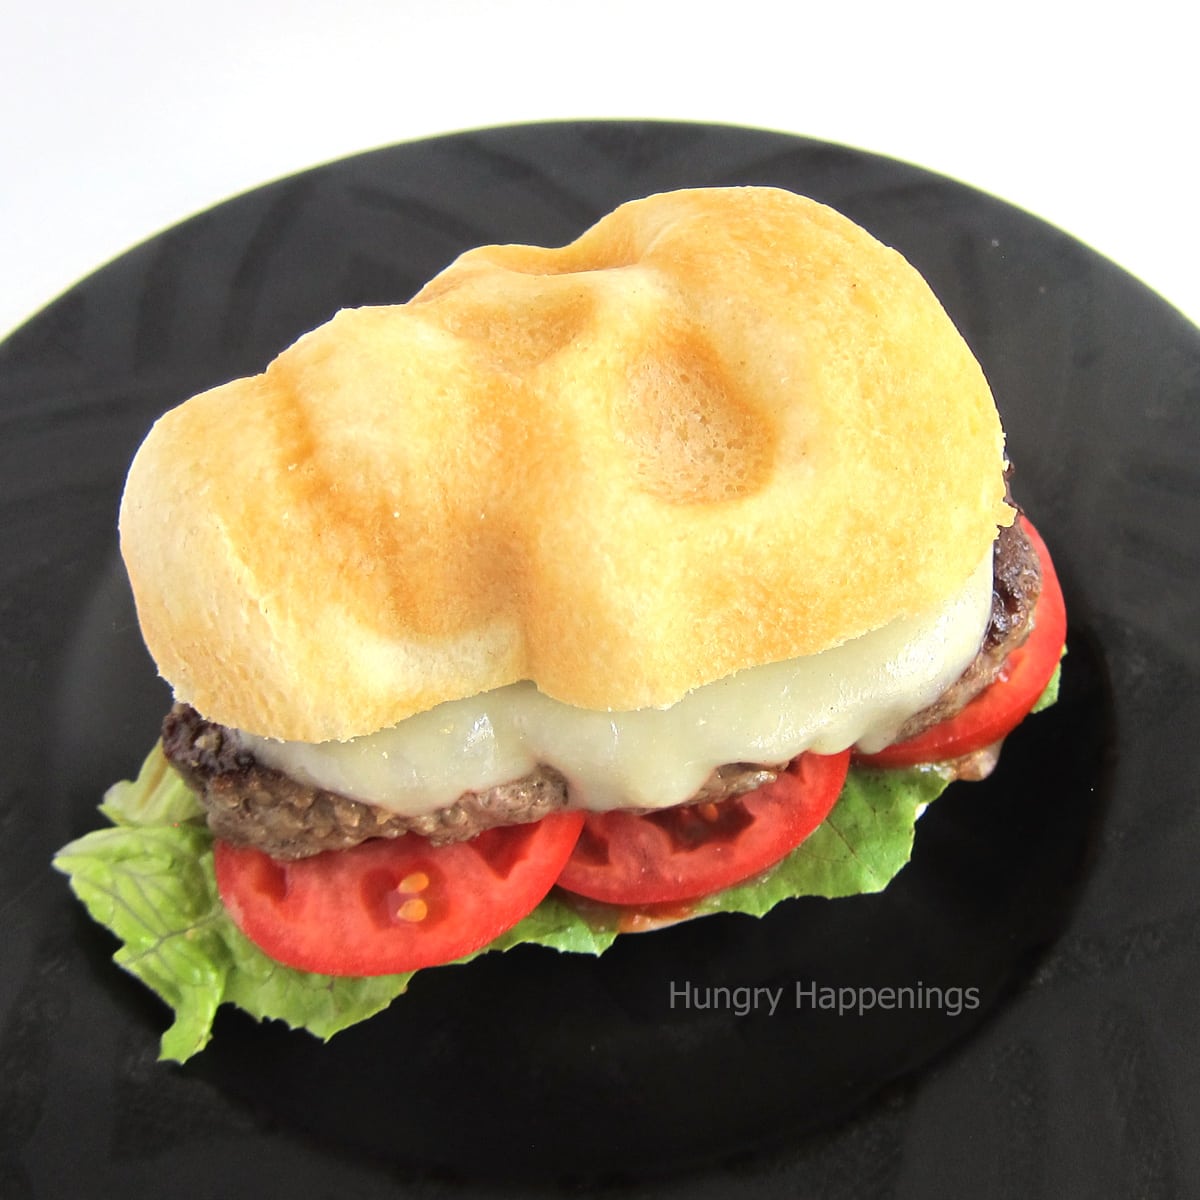 side view of a skull-shaped cheeseburger with lettuce and tomatoes.